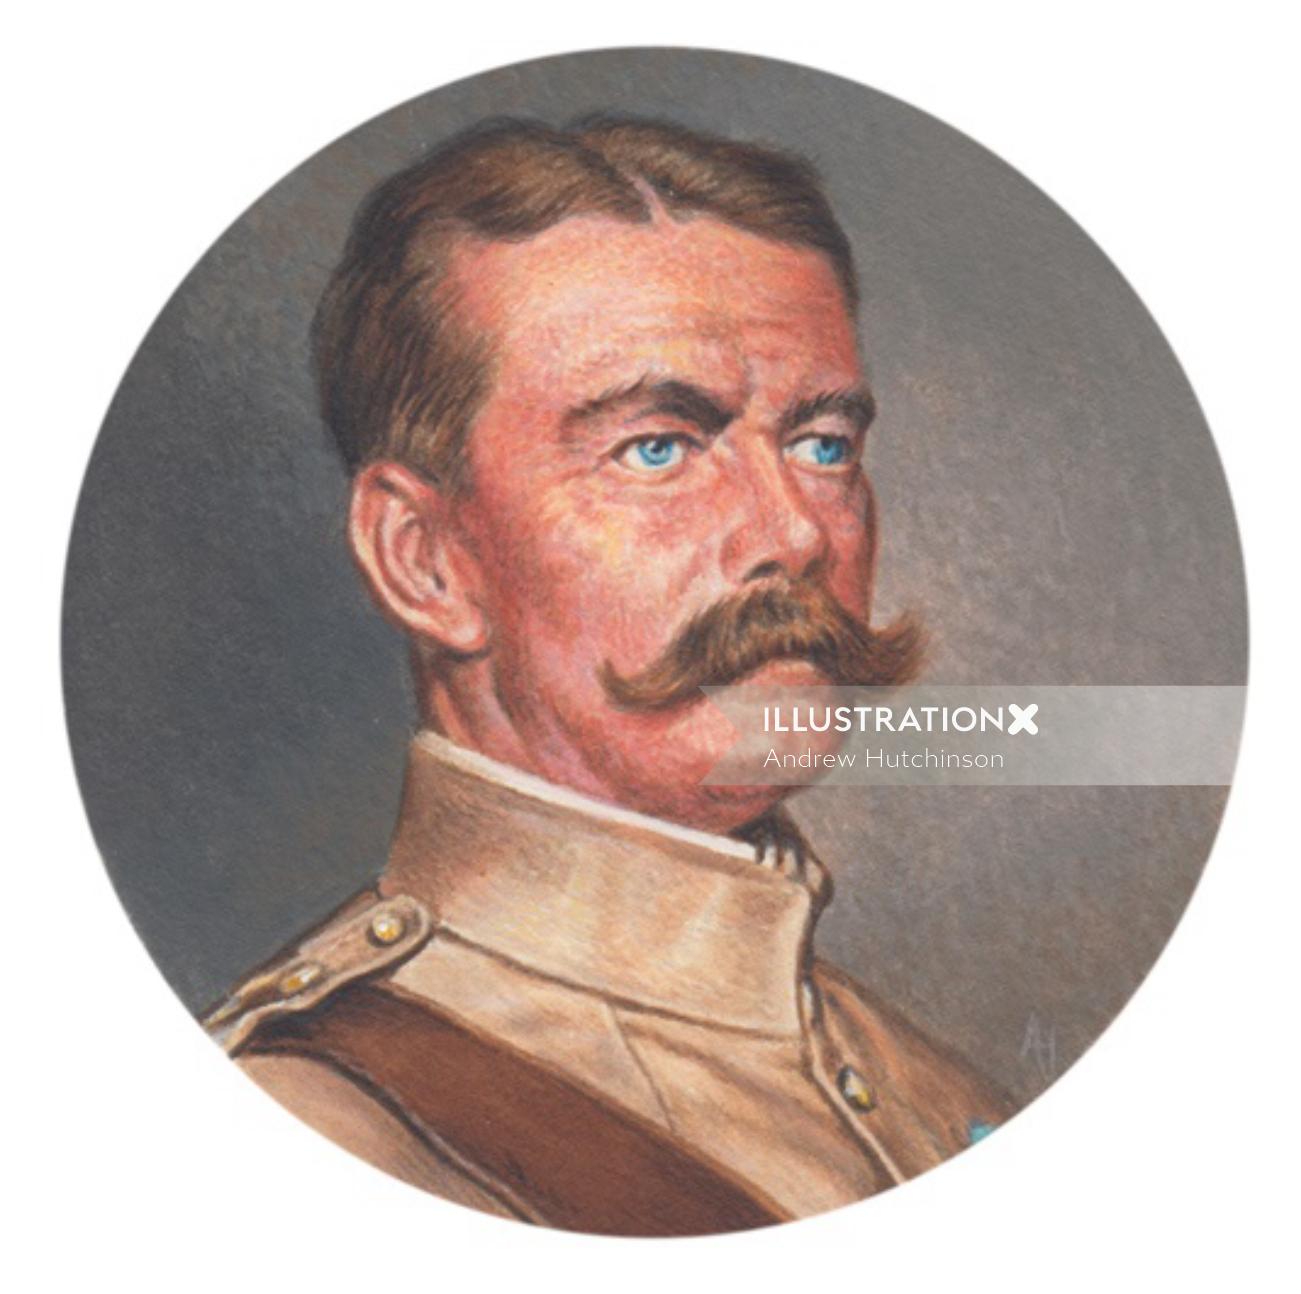 This is a portrait of Herbert Kitchener, drawn by UK based artist